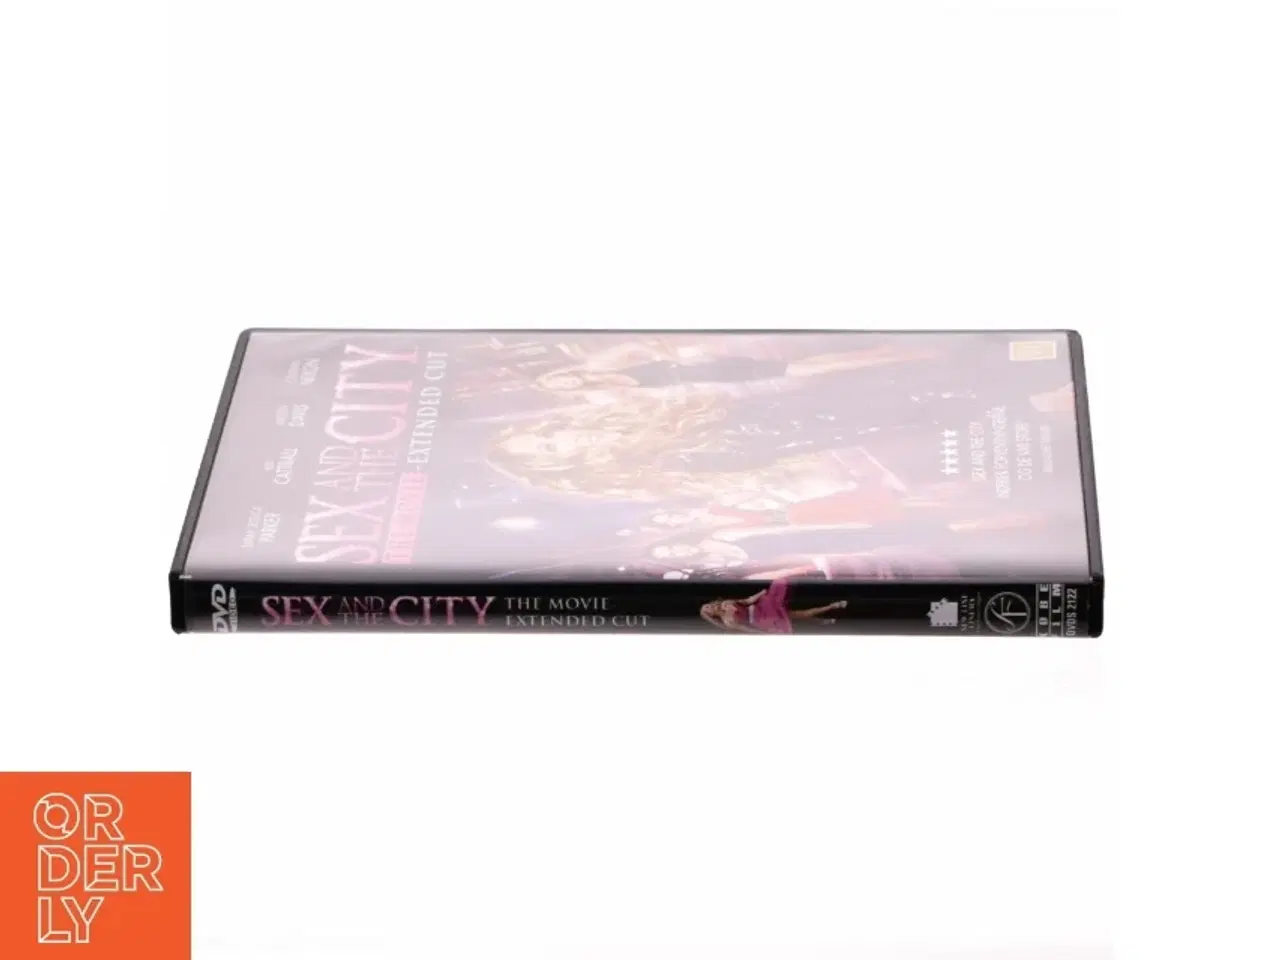 Billede 2 - SEX AND THE CITY, the movie